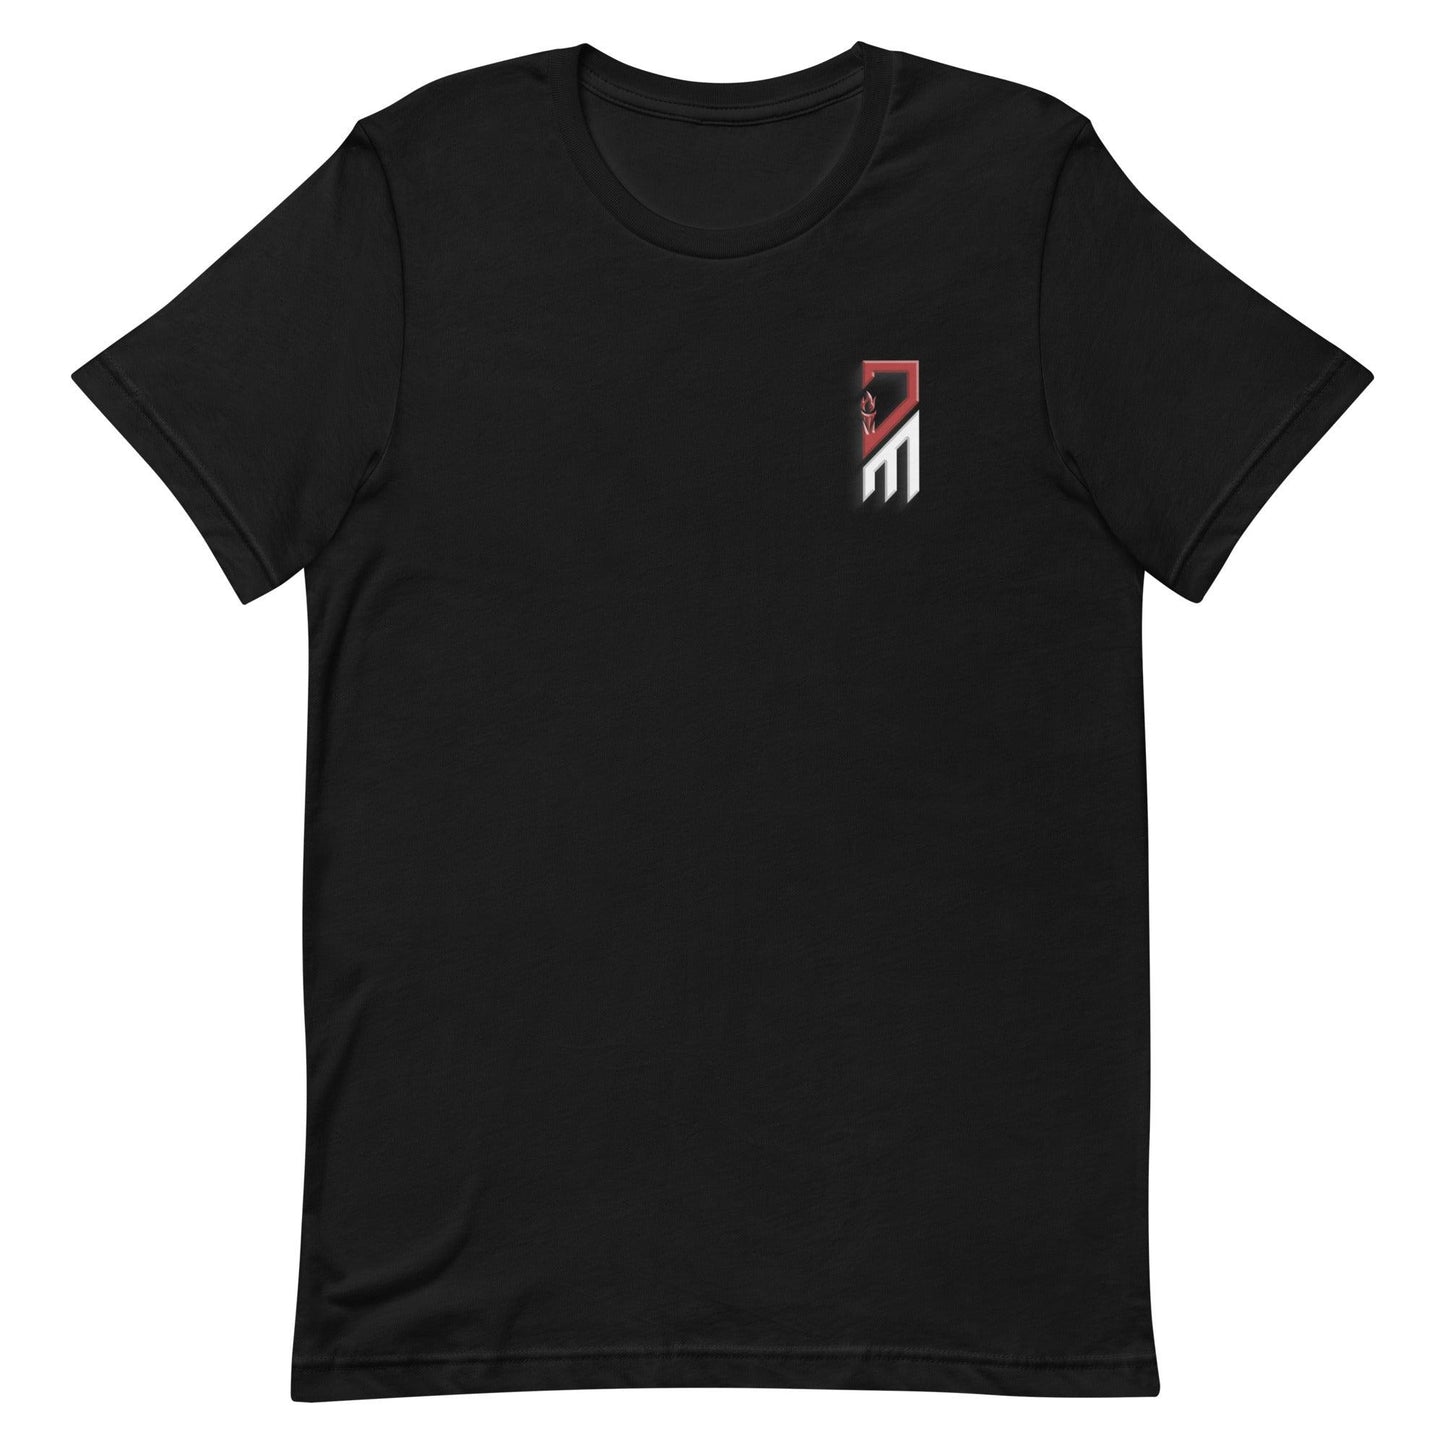 Jarvis Moss "Essential" t-shirt - Fan Arch